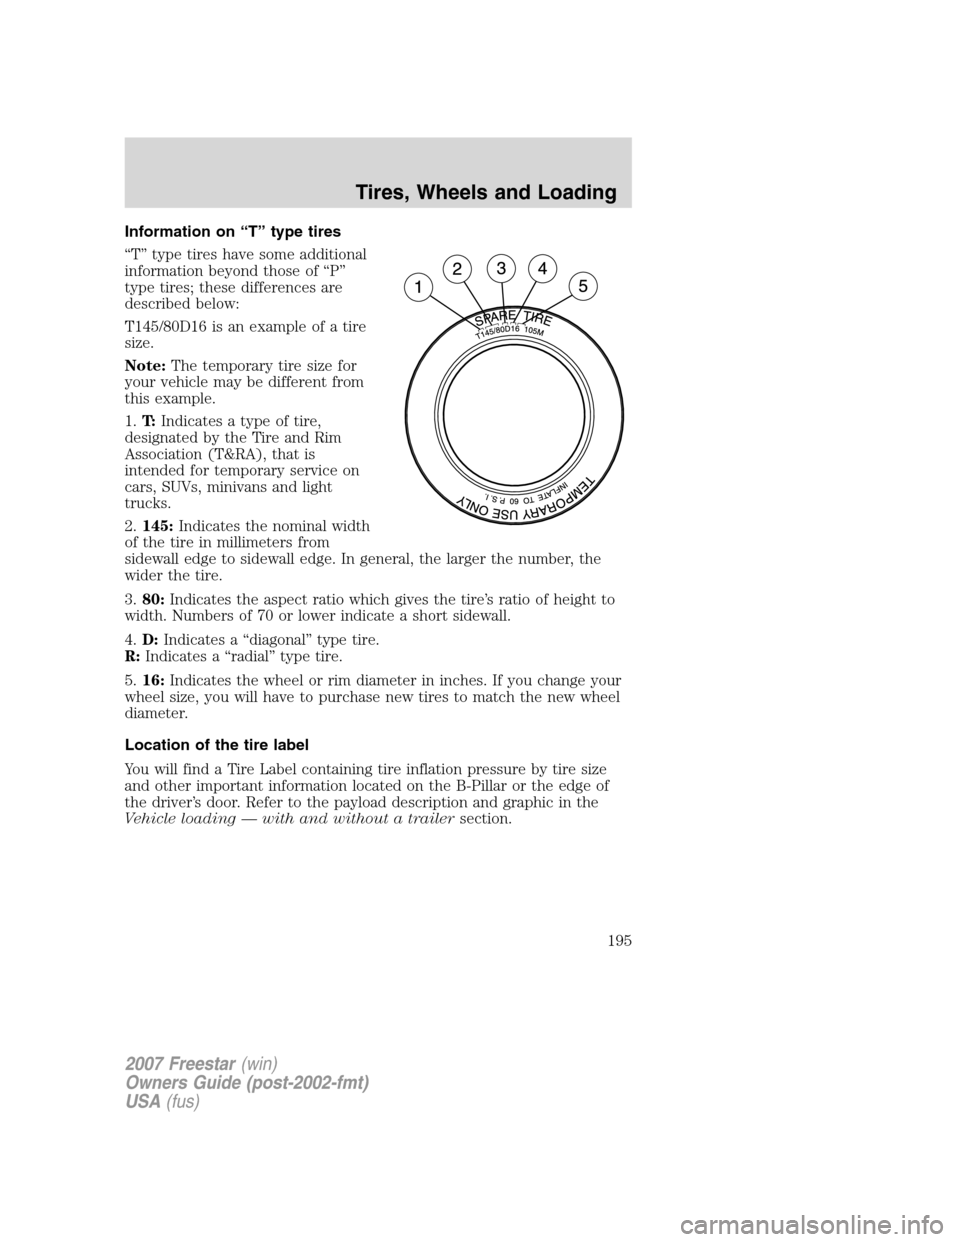 FORD FREESTAR 2007 1.G Owners Manual Information on “T” type tires
“T” type tires have some additional
information beyond those of “P”
type tires; these differences are
described below:
T145/80D16 is an example of a tire
size